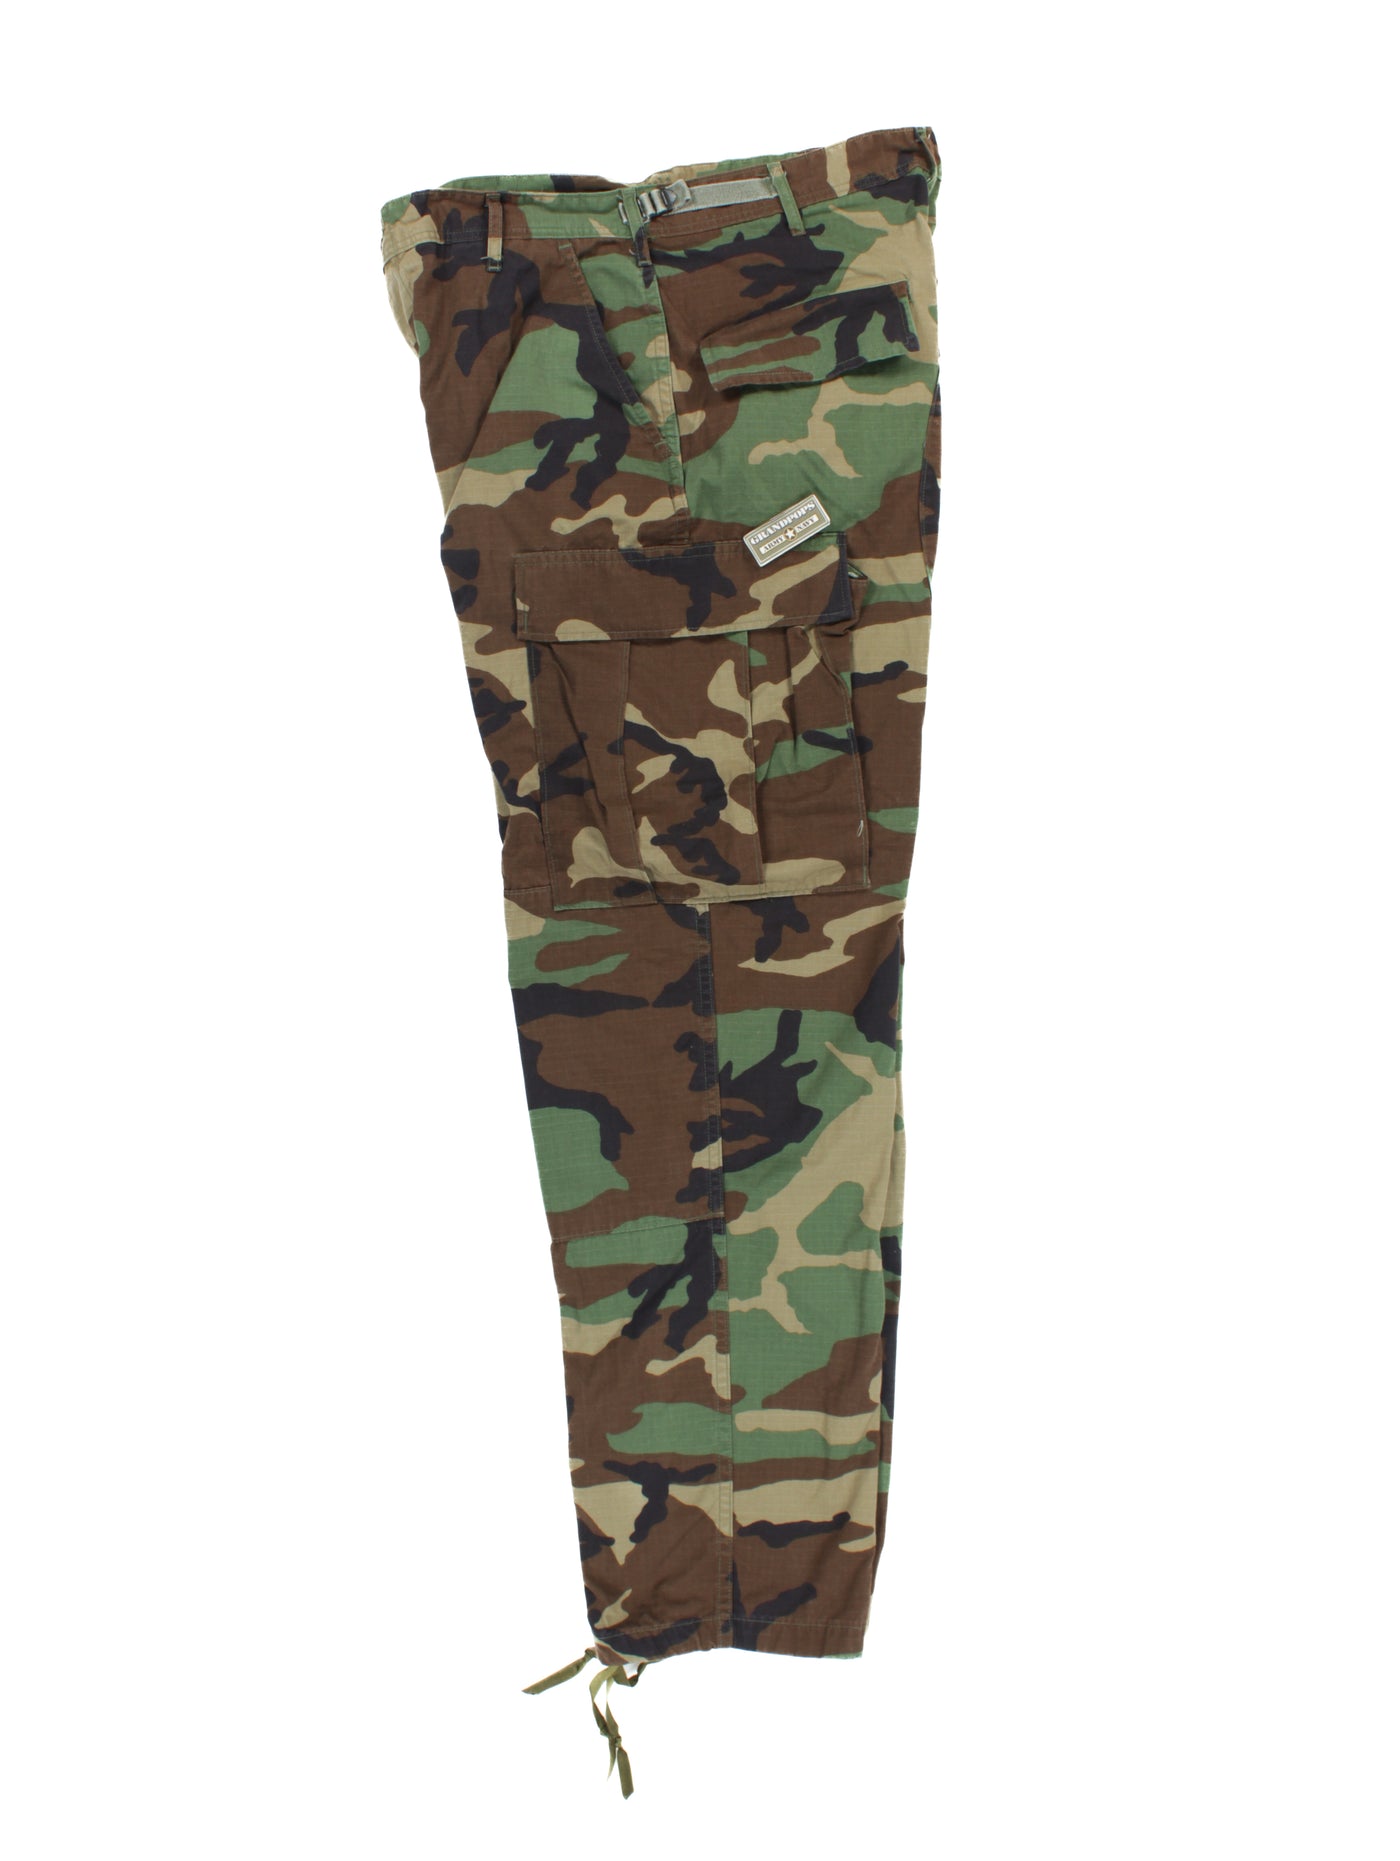 US Army ACU Pants Digital Camo Combat Trousers - Used | Army Navy Warehouse